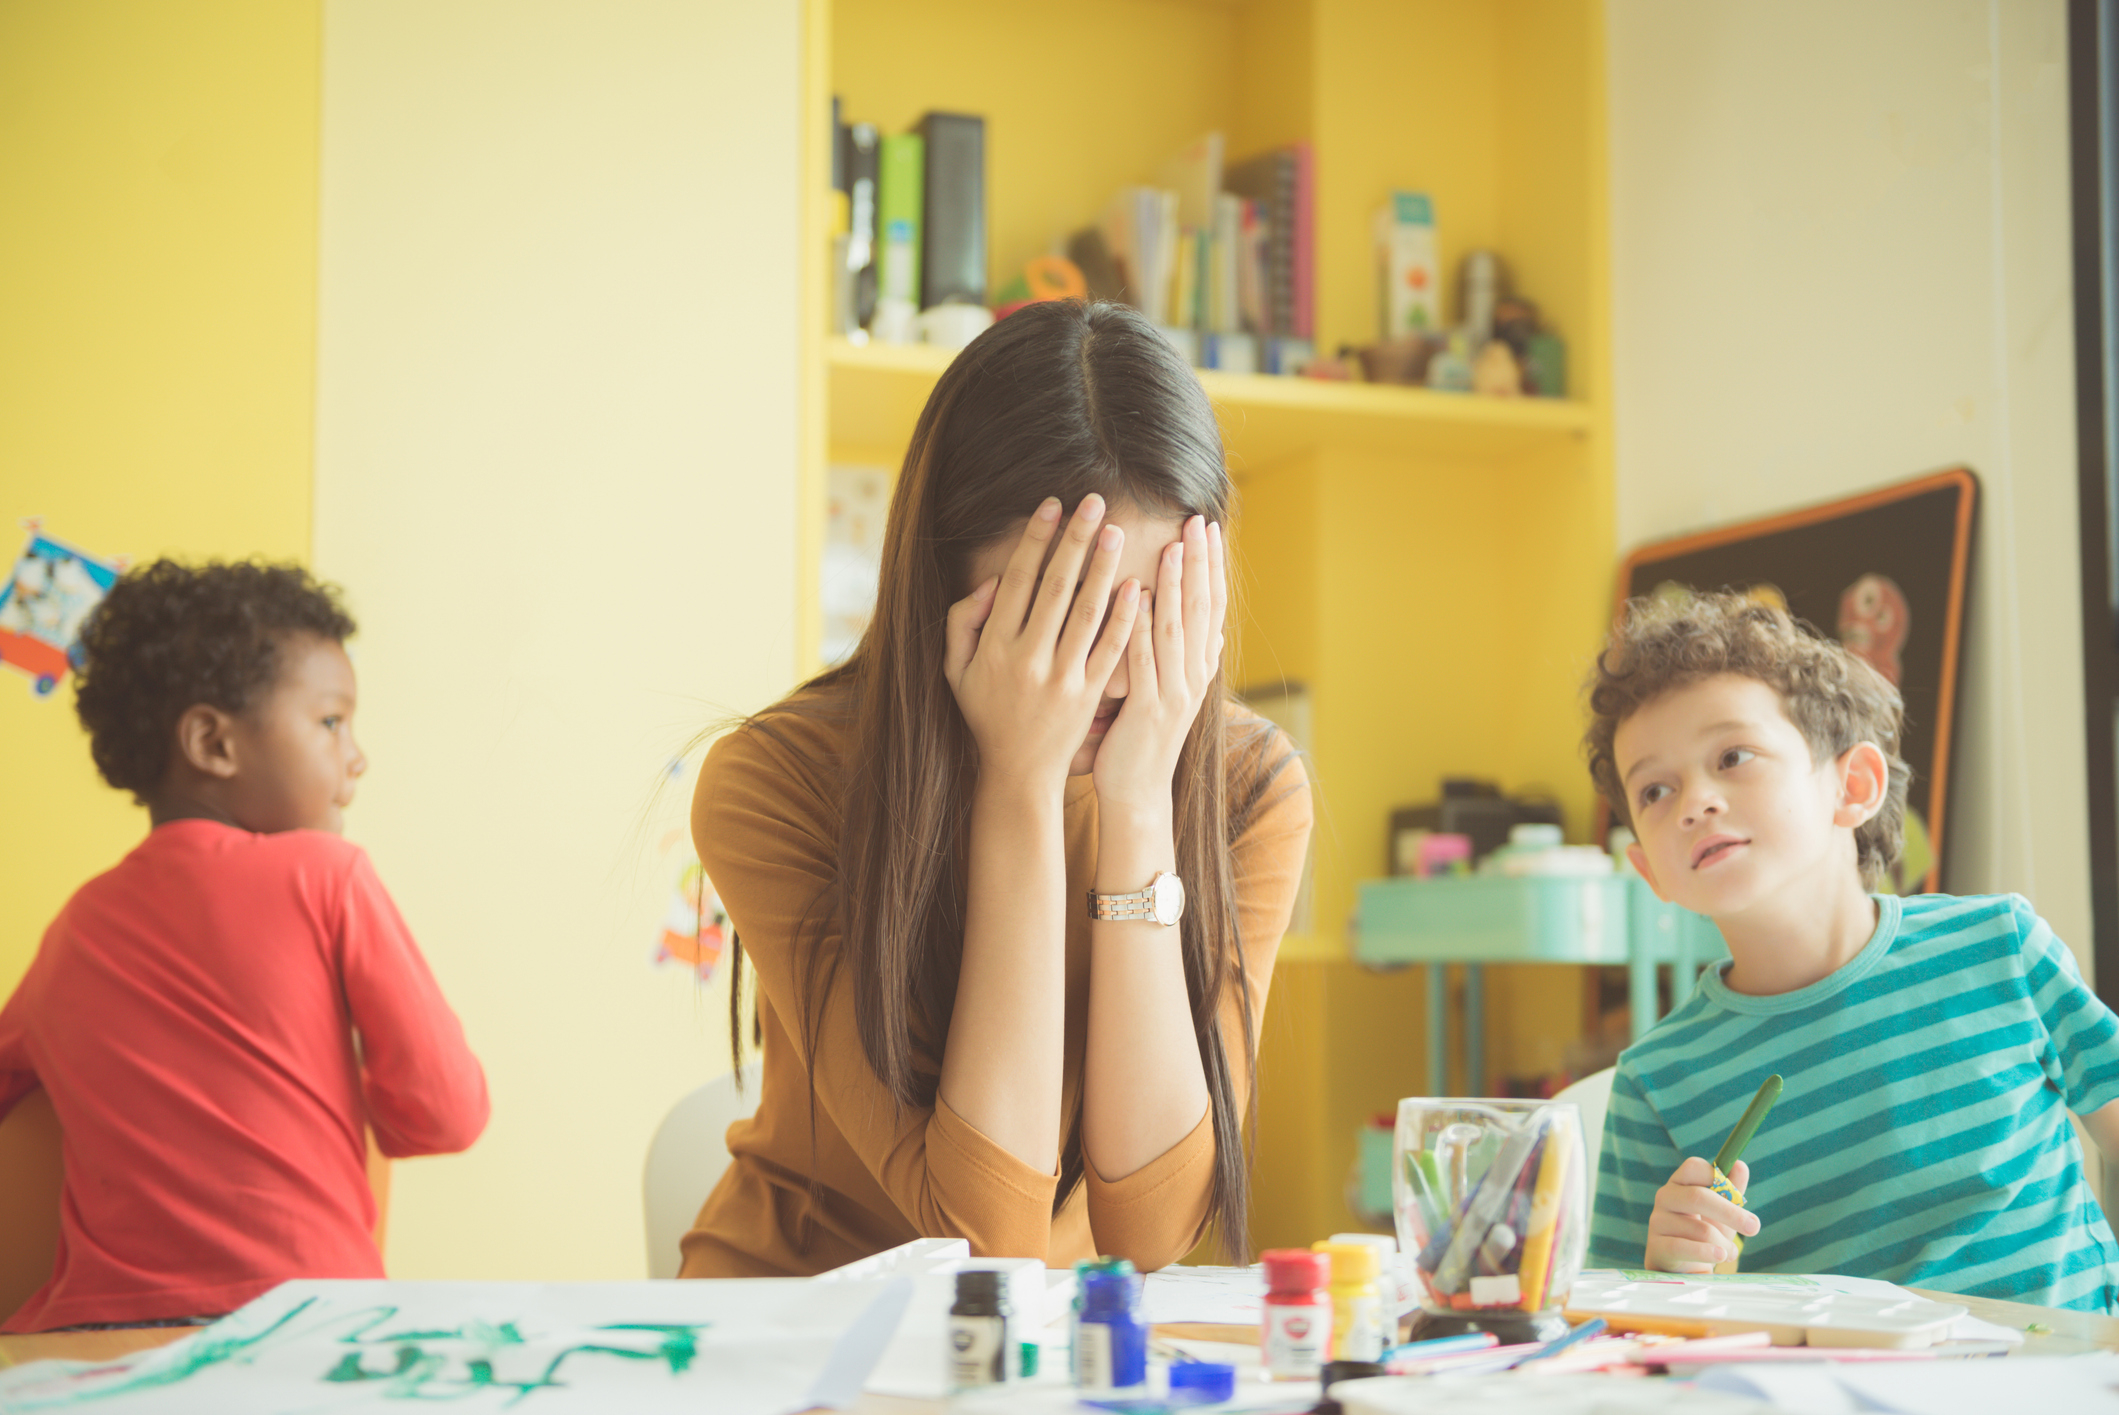 Adult covers face, two children with art supplies on table appear curious